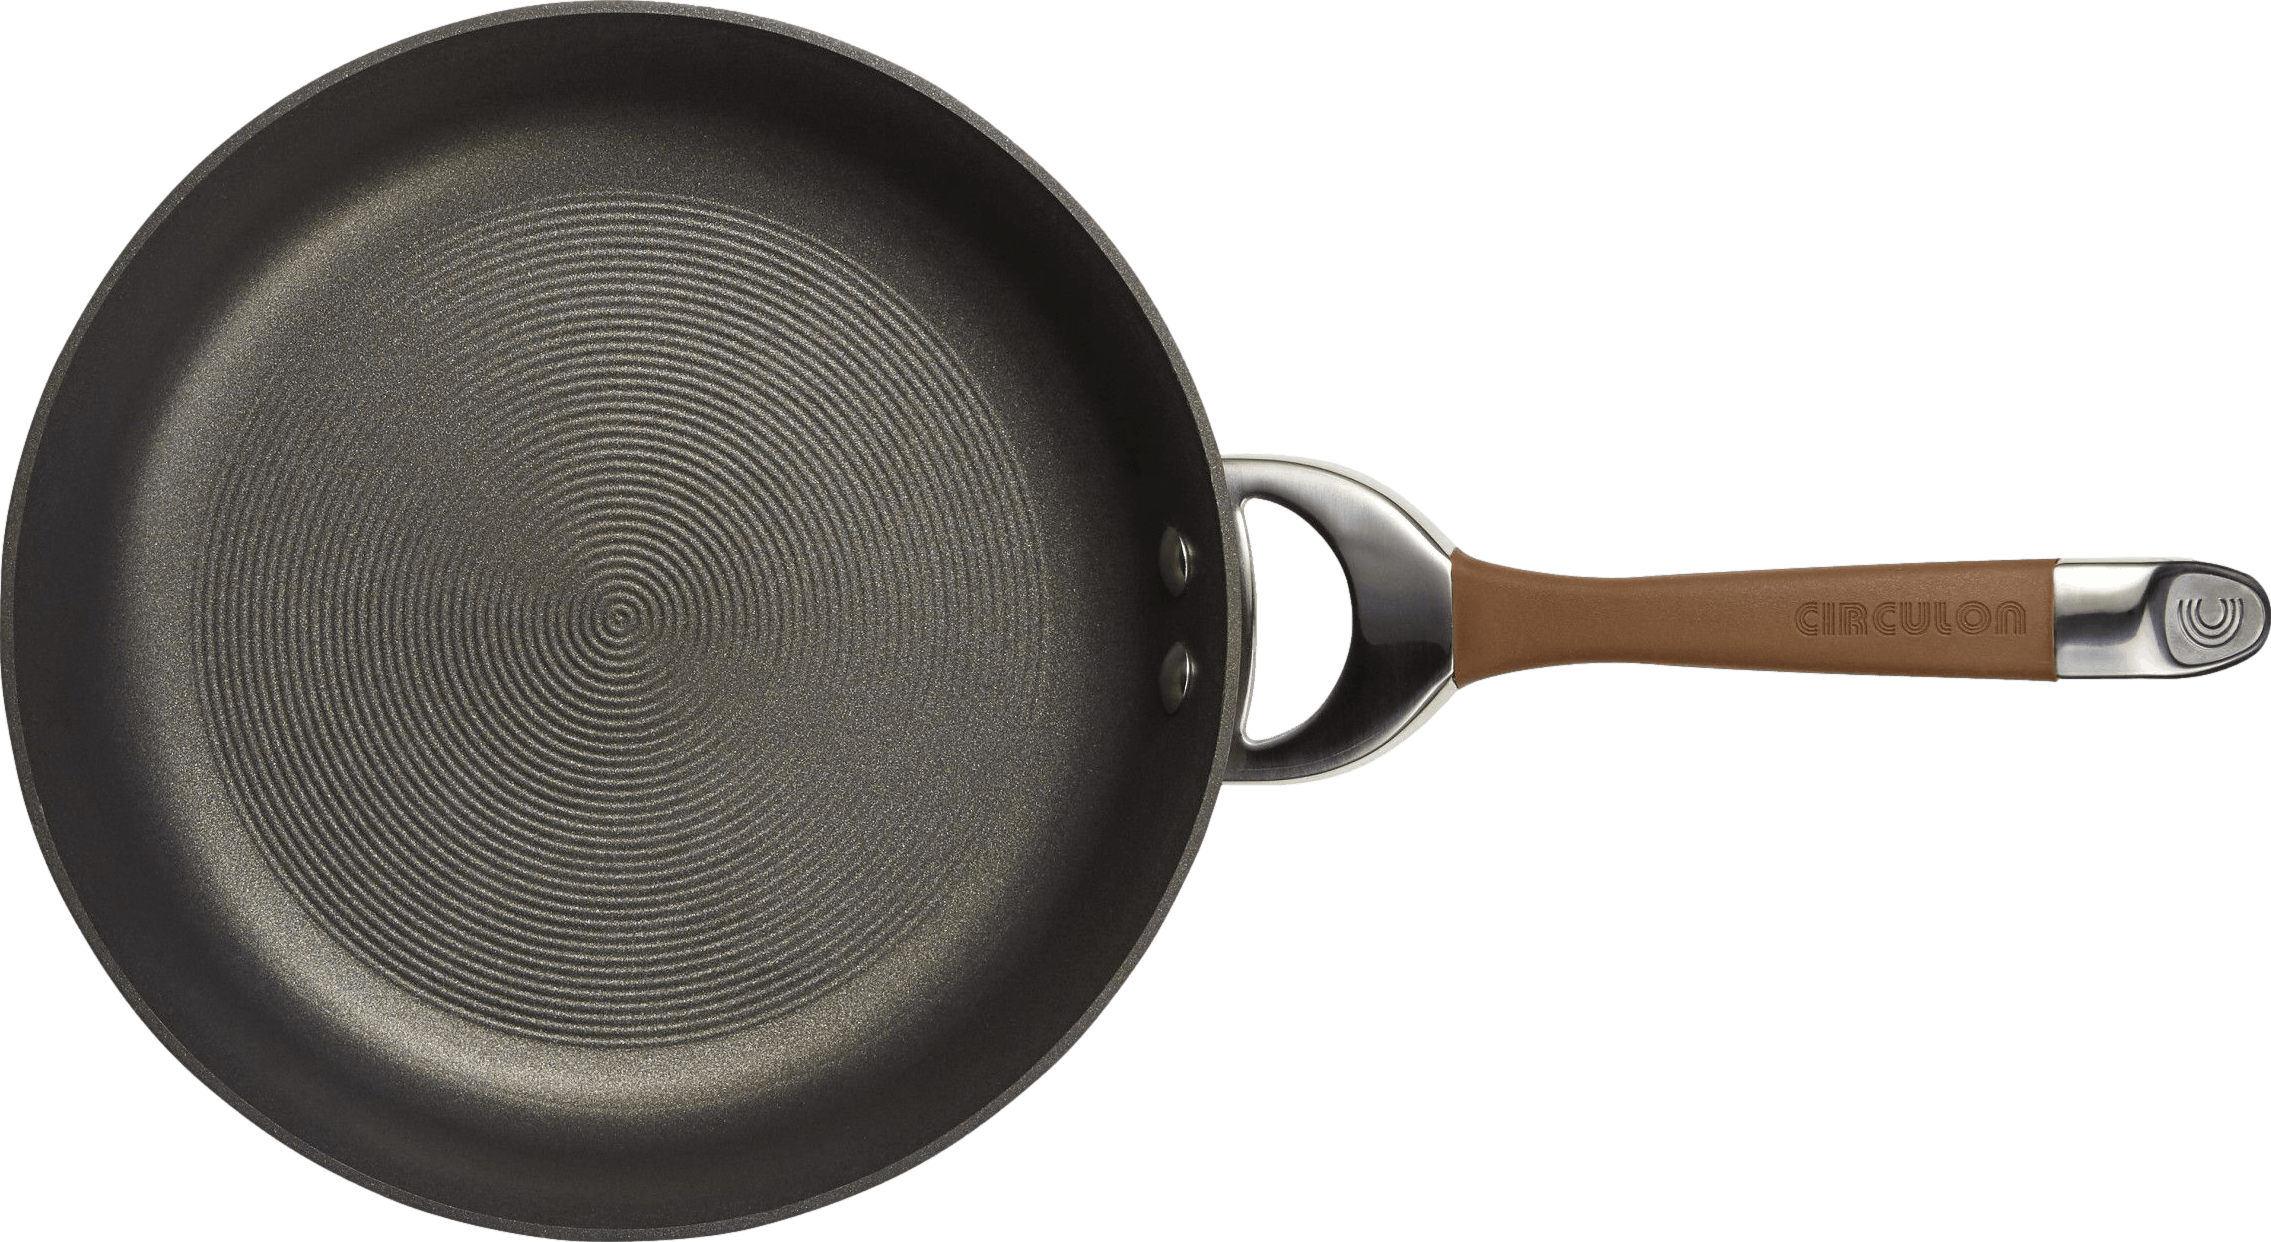 Circulon Symmetry Hard-Anodized Nonstick Induction Stir Fry Pan with Helper  Handle, 14-Inch